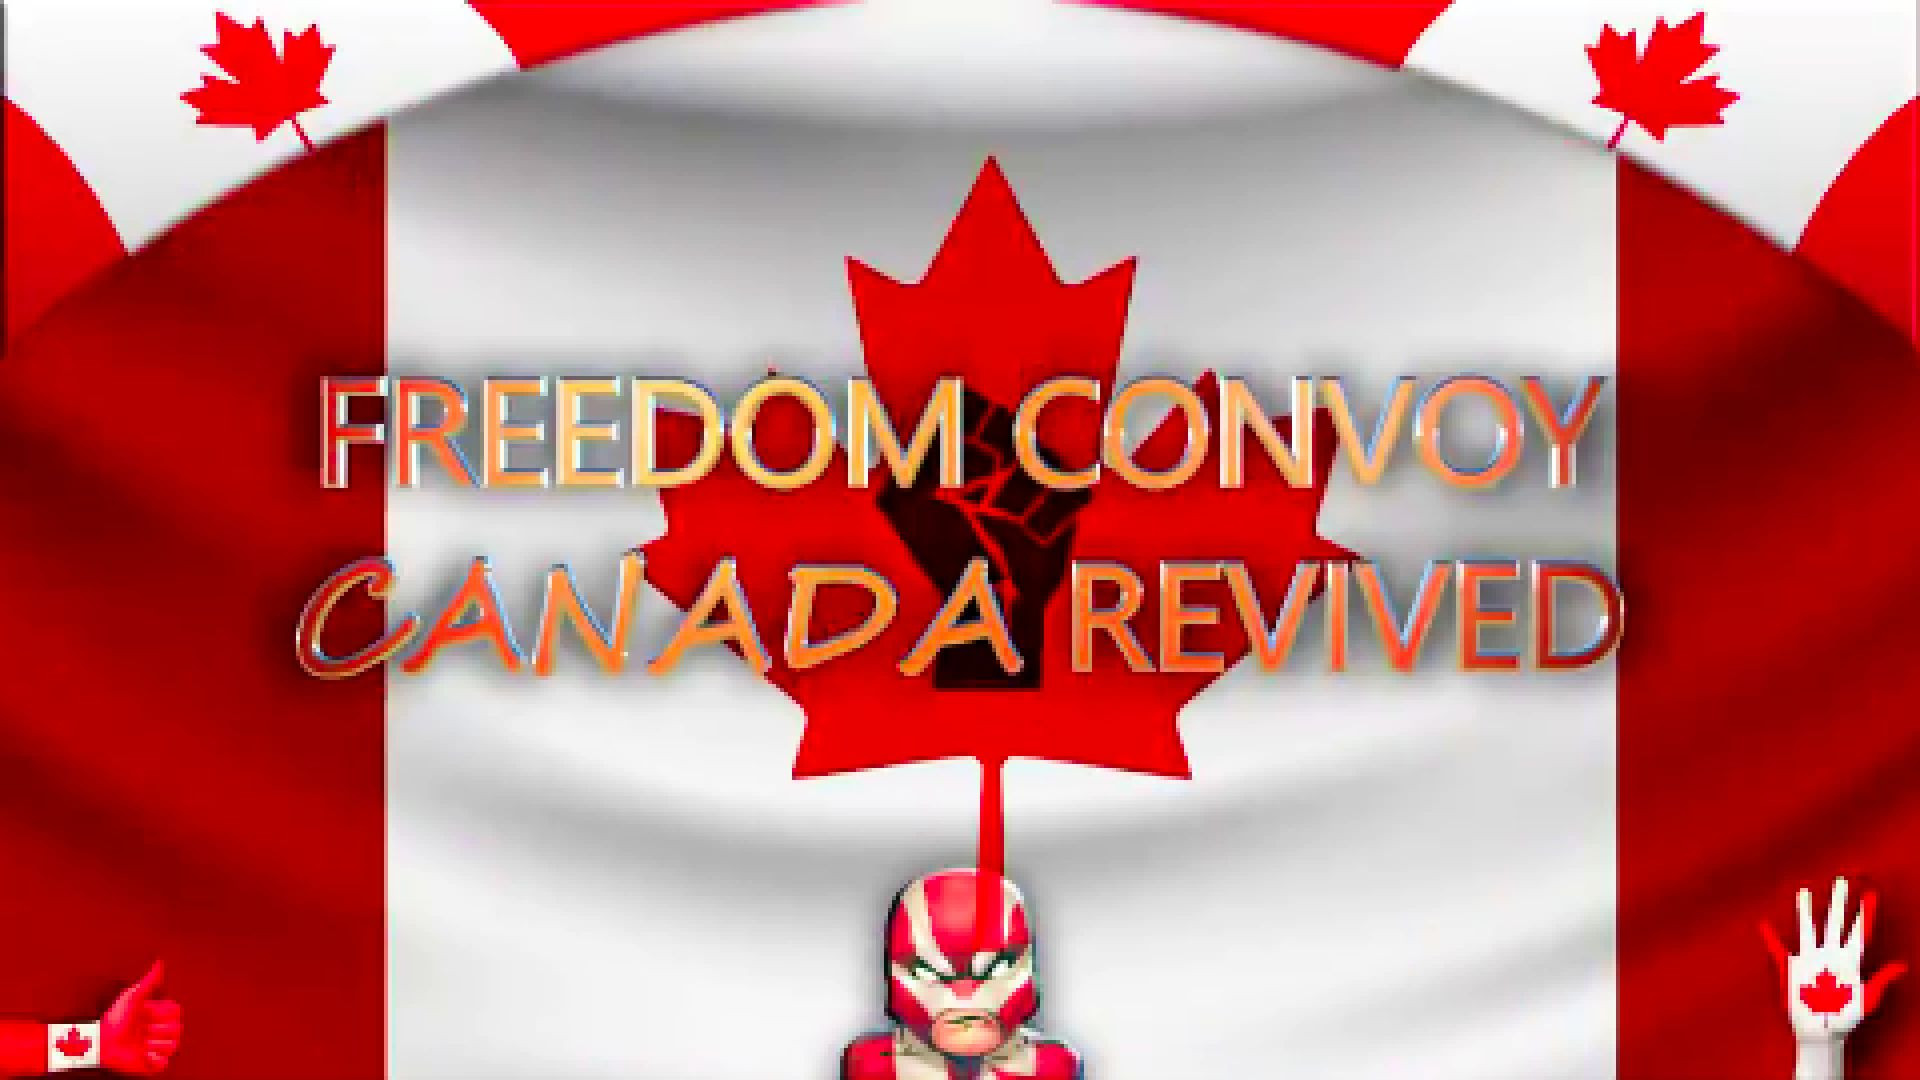 FREEDOM CONVOY CANADA REVIVED - It’s time to FREE our Trucker Heroes